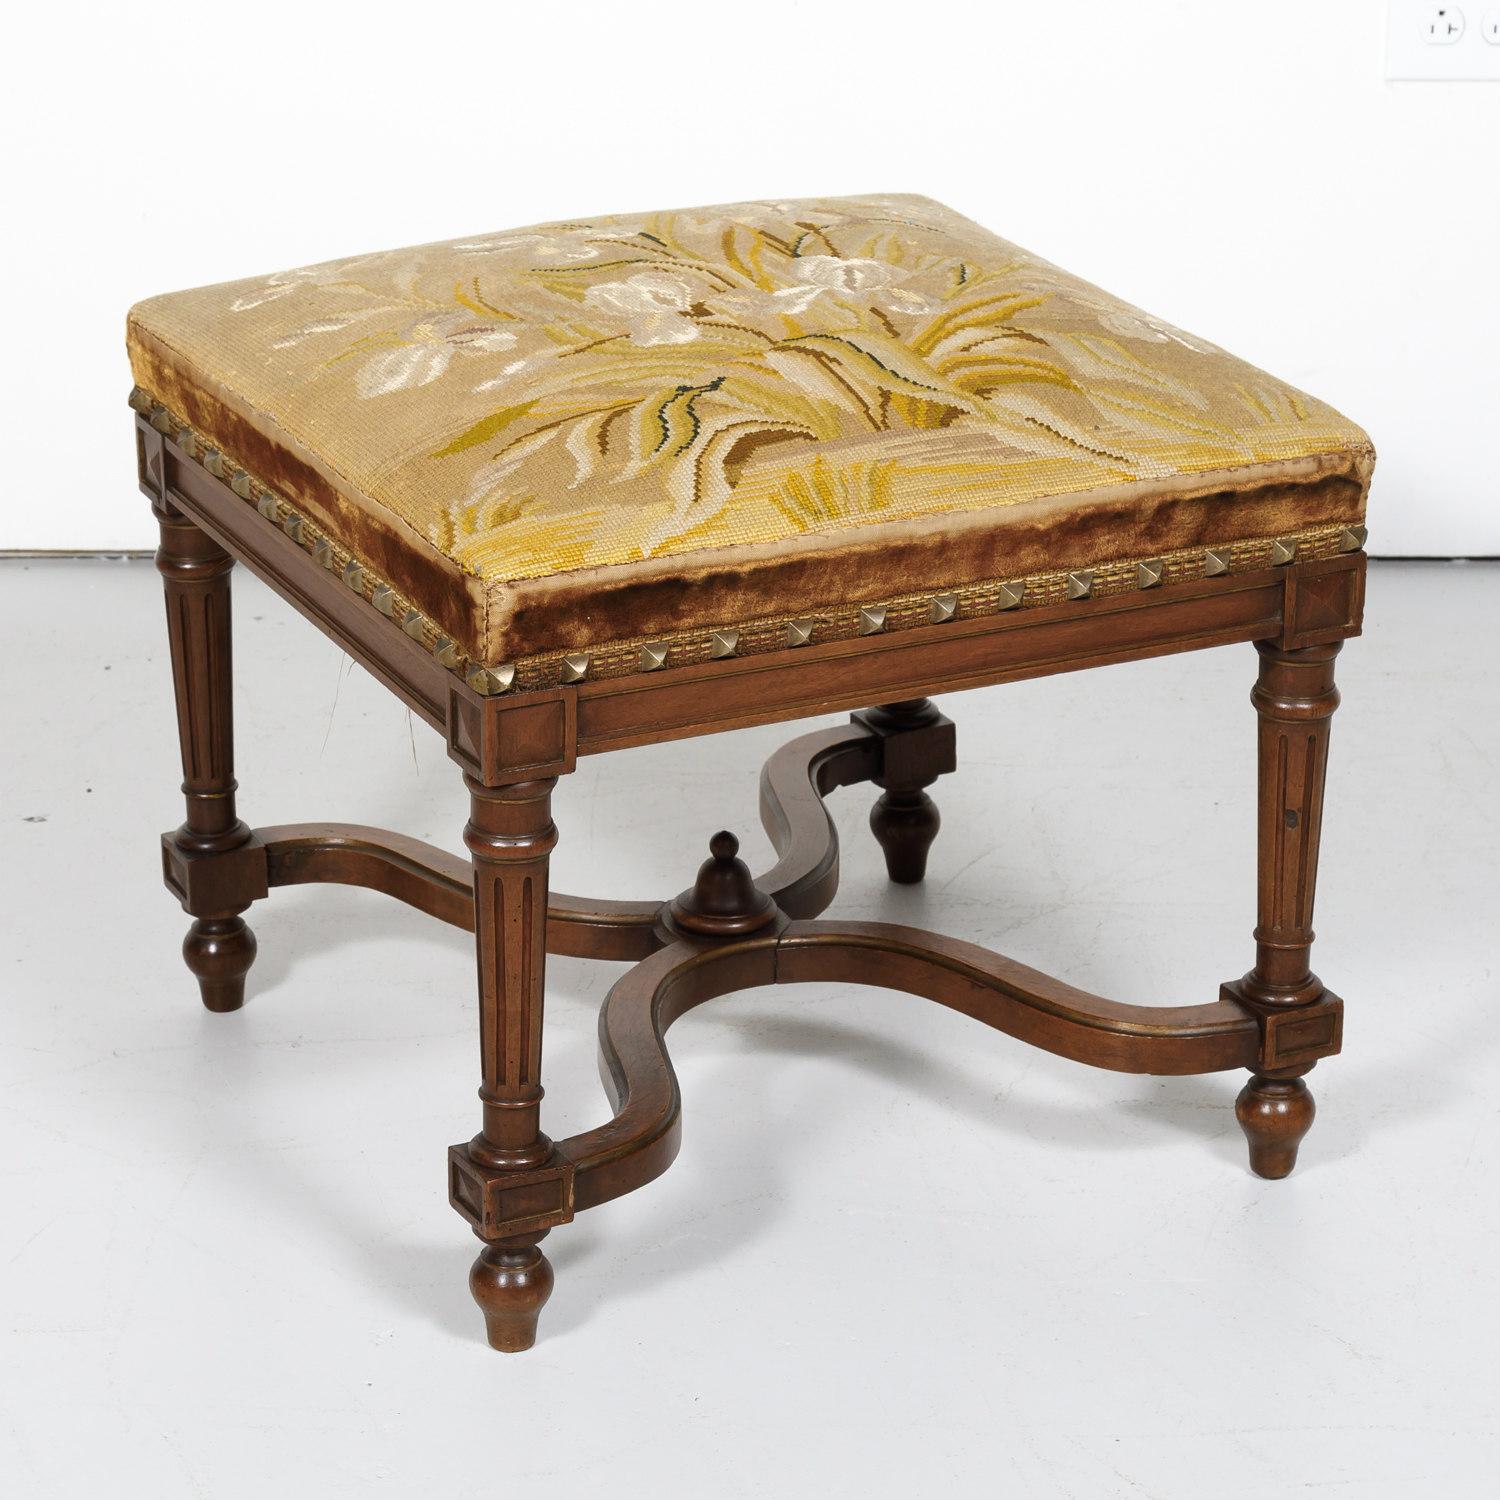 A lovely French Napoleon III period footstool handcrafted of walnut in Normandy having a beautiful floral needlework seat embellished with a velvet trim and brass nailheads, circa 1880s. Raised on fluted, tapering legs joined by a curved, carved 